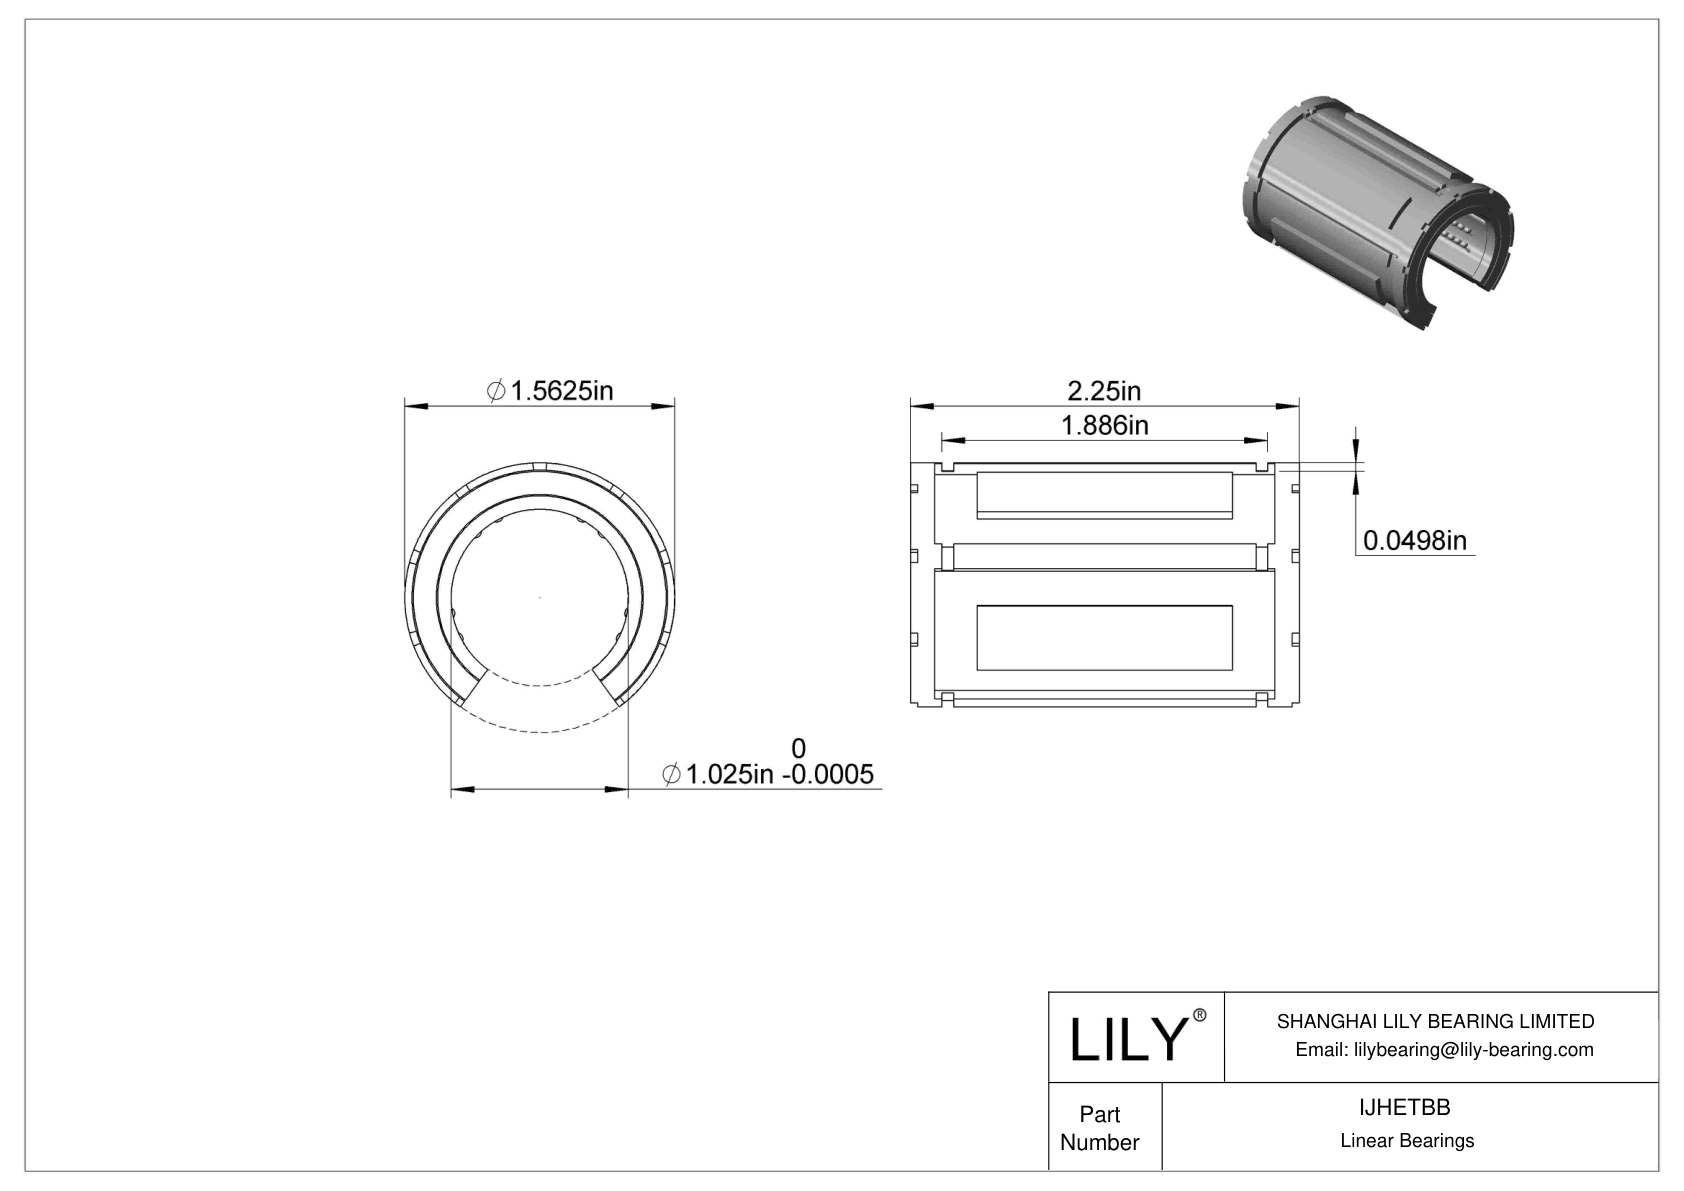 IJHETBB Common Linear Ball Bearings for Support Rail Shafts cad drawing